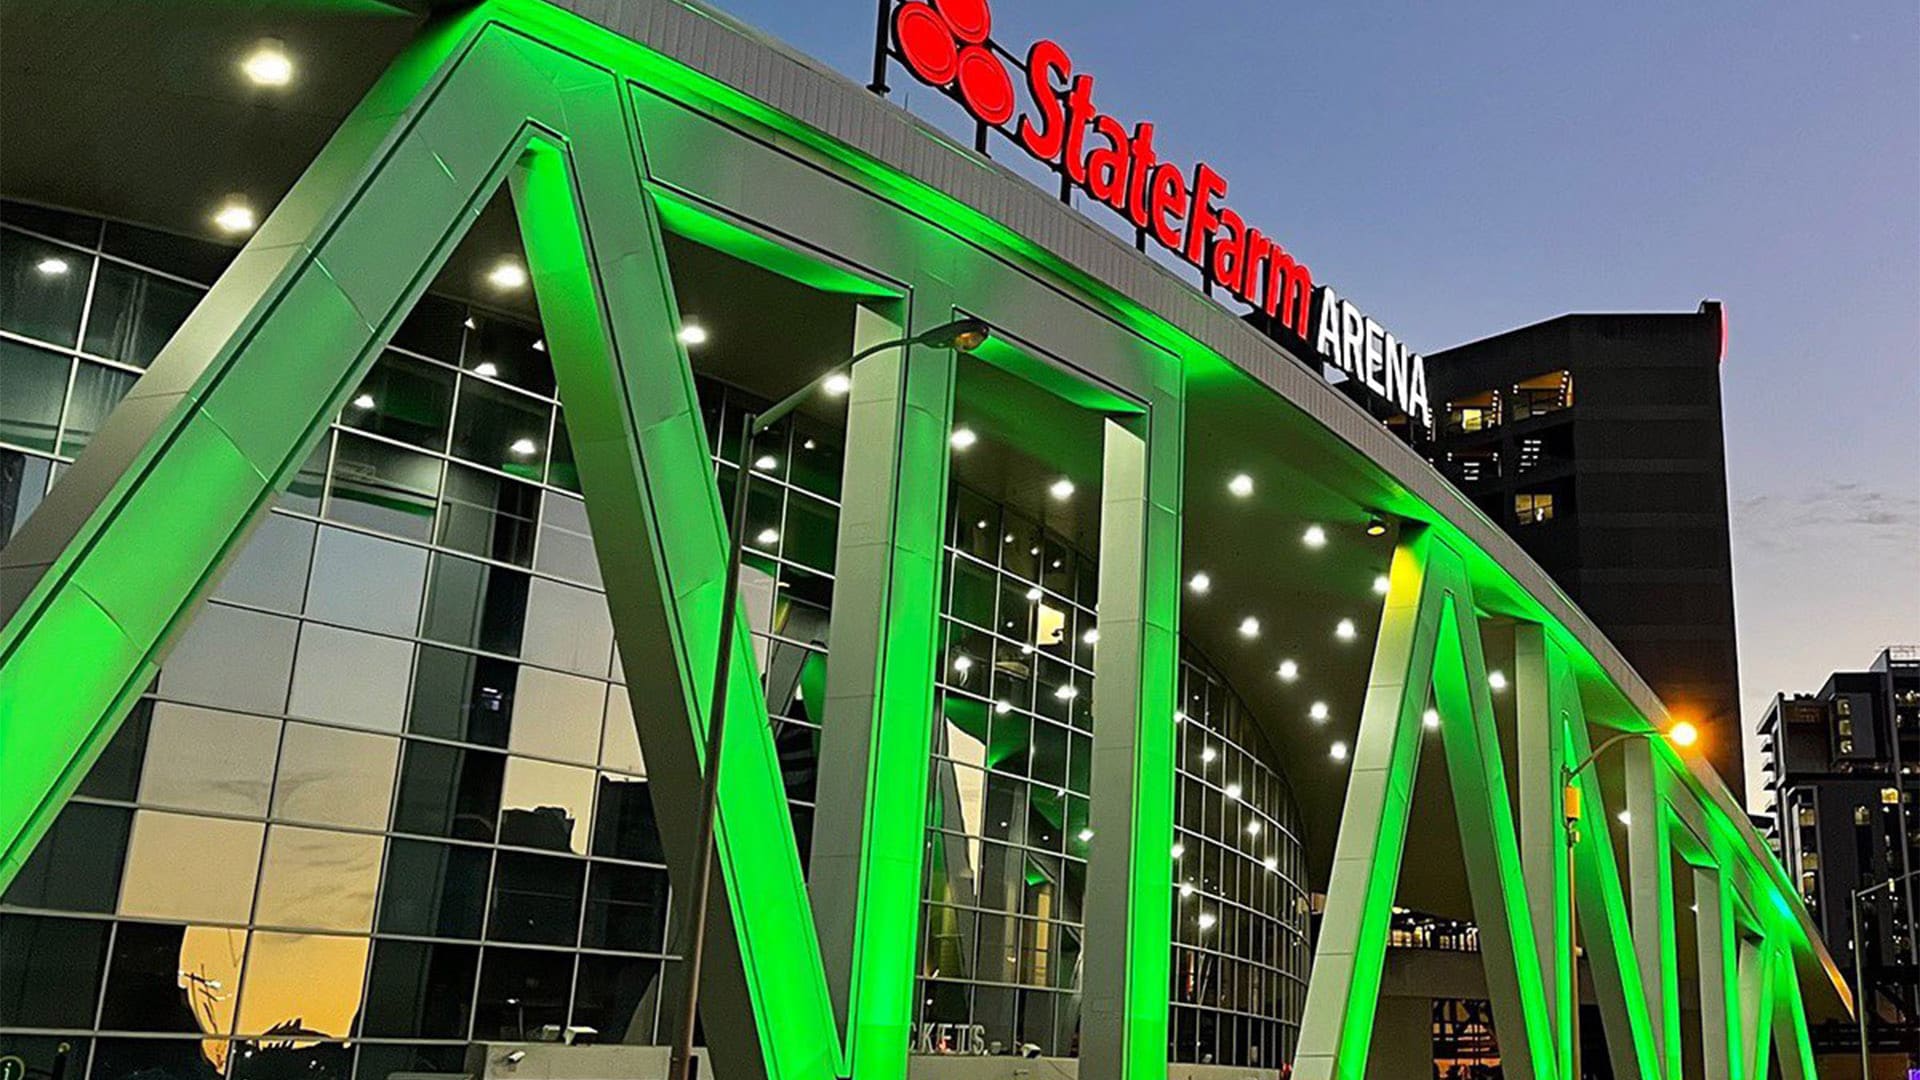 HAWKS AND STATE FARM ARENA ANNOUNCE PLANS TO CELEBRATE EARTH MONTH BY SPOTLIGHTING LEADERSHIP IN ZERO WASTE AND SUSTAINABILITY PRACTICES